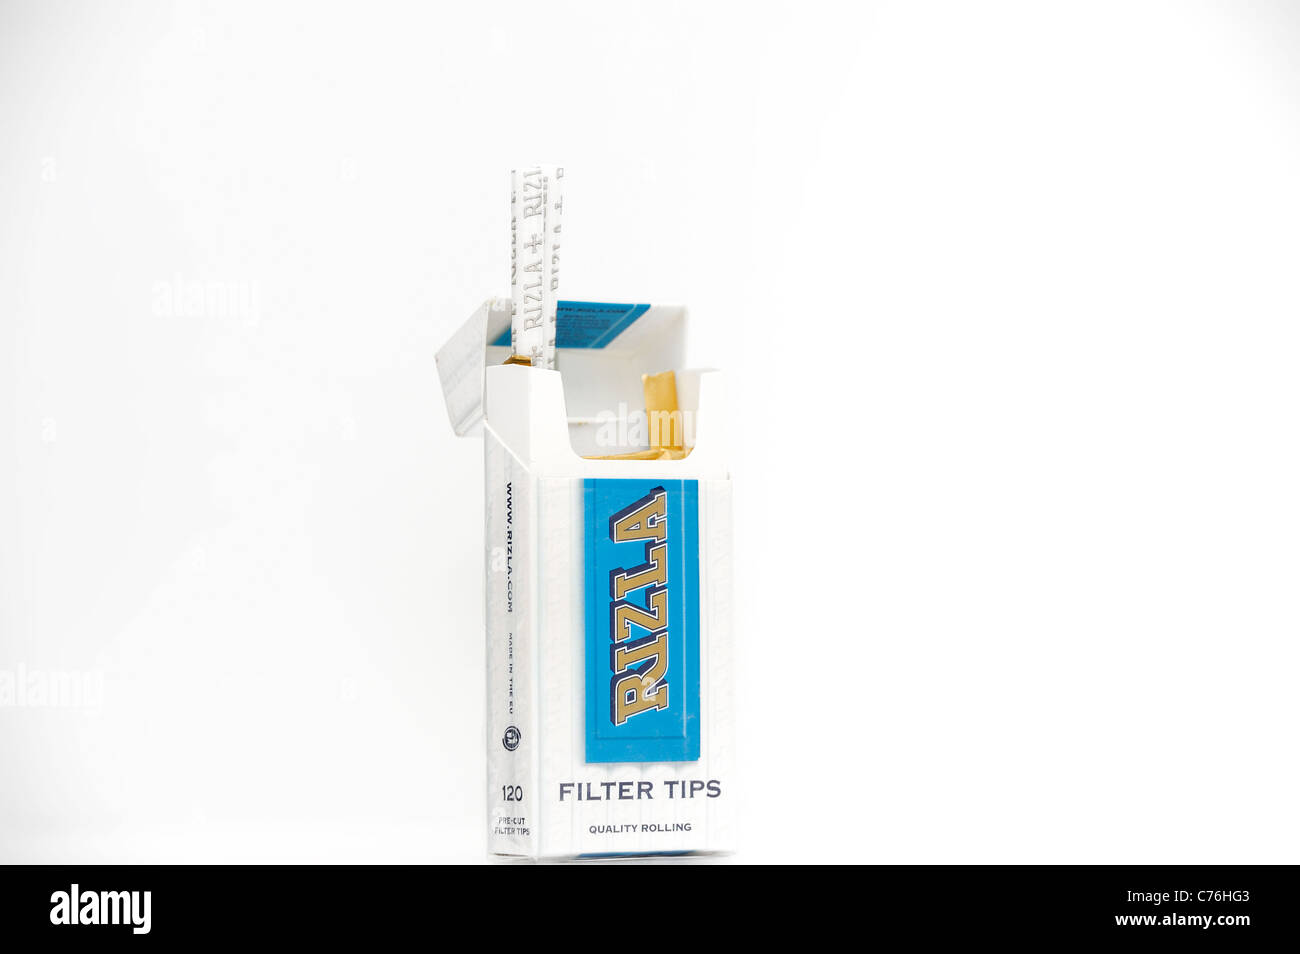 packet of rizla filter tips english packagng Stock Photo